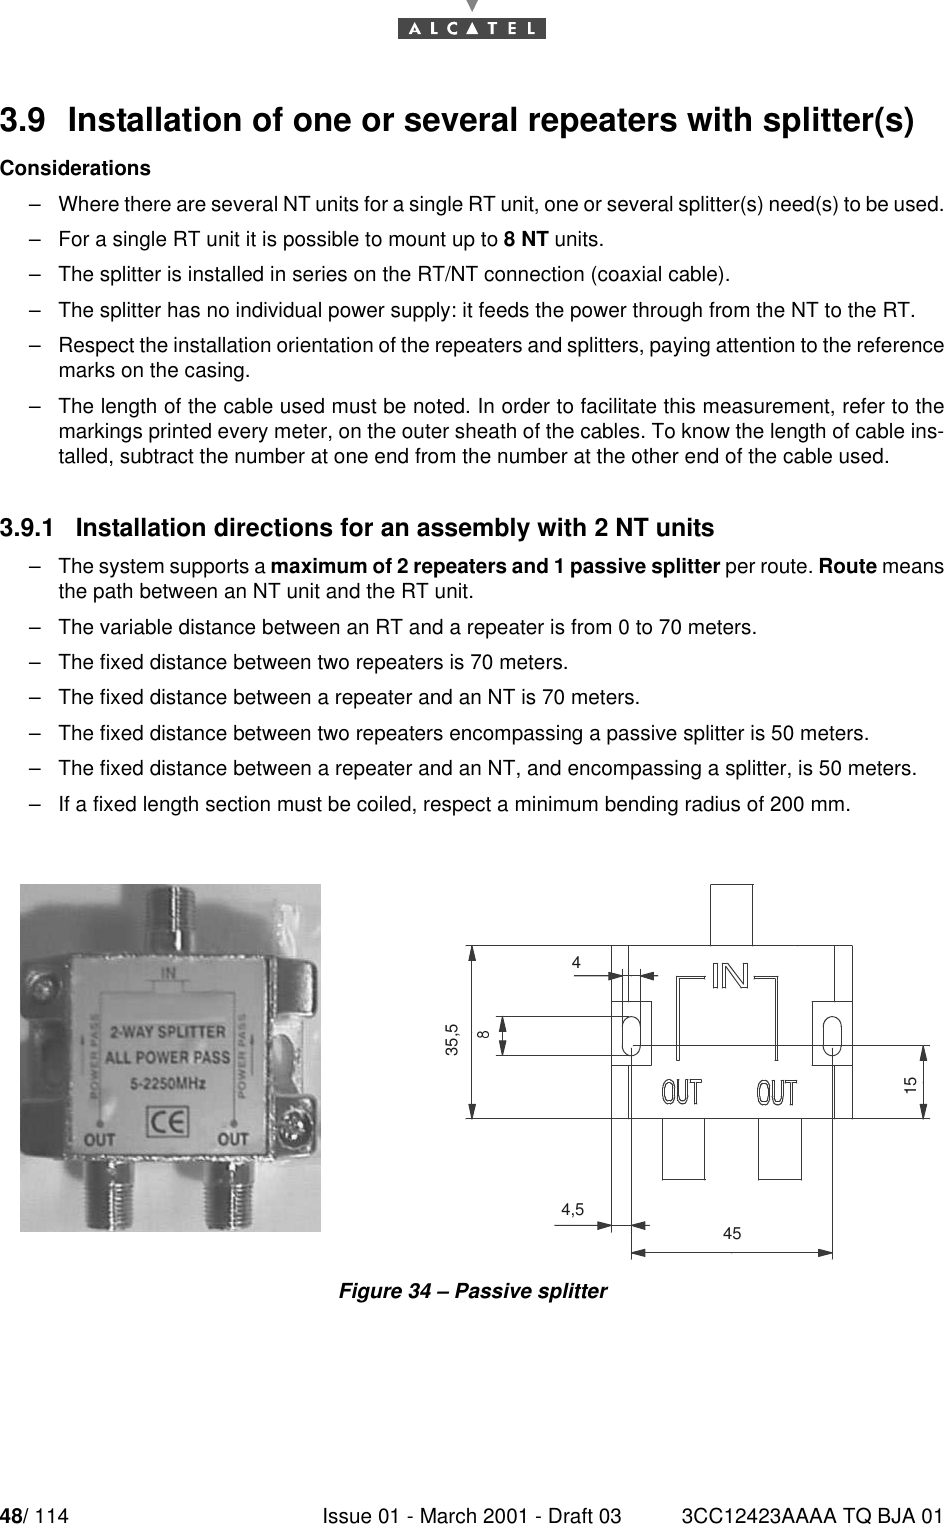 48/ 114 Issue 01 - March 2001 - Draft 03 3CC12423AAAA TQ BJA 01523.9  Installation of one or several repeaters with splitter(s)Considerations–Where there are several NT units for a single RT unit, one or several splitter(s) need(s) to be used.–For a single RT unit it is possible to mount up to 8 NT units.–The splitter is installed in series on the RT/NT connection (coaxial cable).–The splitter has no individual power supply: it feeds the power through from the NT to the RT.–Respect the installation orientation of the repeaters and splitters, paying attention to the referencemarks on the casing.–The length of the cable used must be noted. In order to facilitate this measurement, refer to themarkings printed every meter, on the outer sheath of the cables. To know the length of cable ins-talled, subtract the number at one end from the number at the other end of the cable used.3.9.1   Installation directions for an assembly with 2 NT units–The system supports a maximum of 2 repeaters and 1 passive splitter per route. Route meansthe path between an NT unit and the RT unit.–The variable distance between an RT and a repeater is from 0 to 70 meters.–The fixed distance between two repeaters is 70 meters.–The fixed distance between a repeater and an NT is 70 meters.–The fixed distance between two repeaters encompassing a passive splitter is 50 meters.–The fixed distance between a repeater and an NT, and encompassing a splitter, is 50 meters.–If a fixed length section must be coiled, respect a minimum bending radius of 200 mm.Figure 34 – Passive splitter15454,5435,5